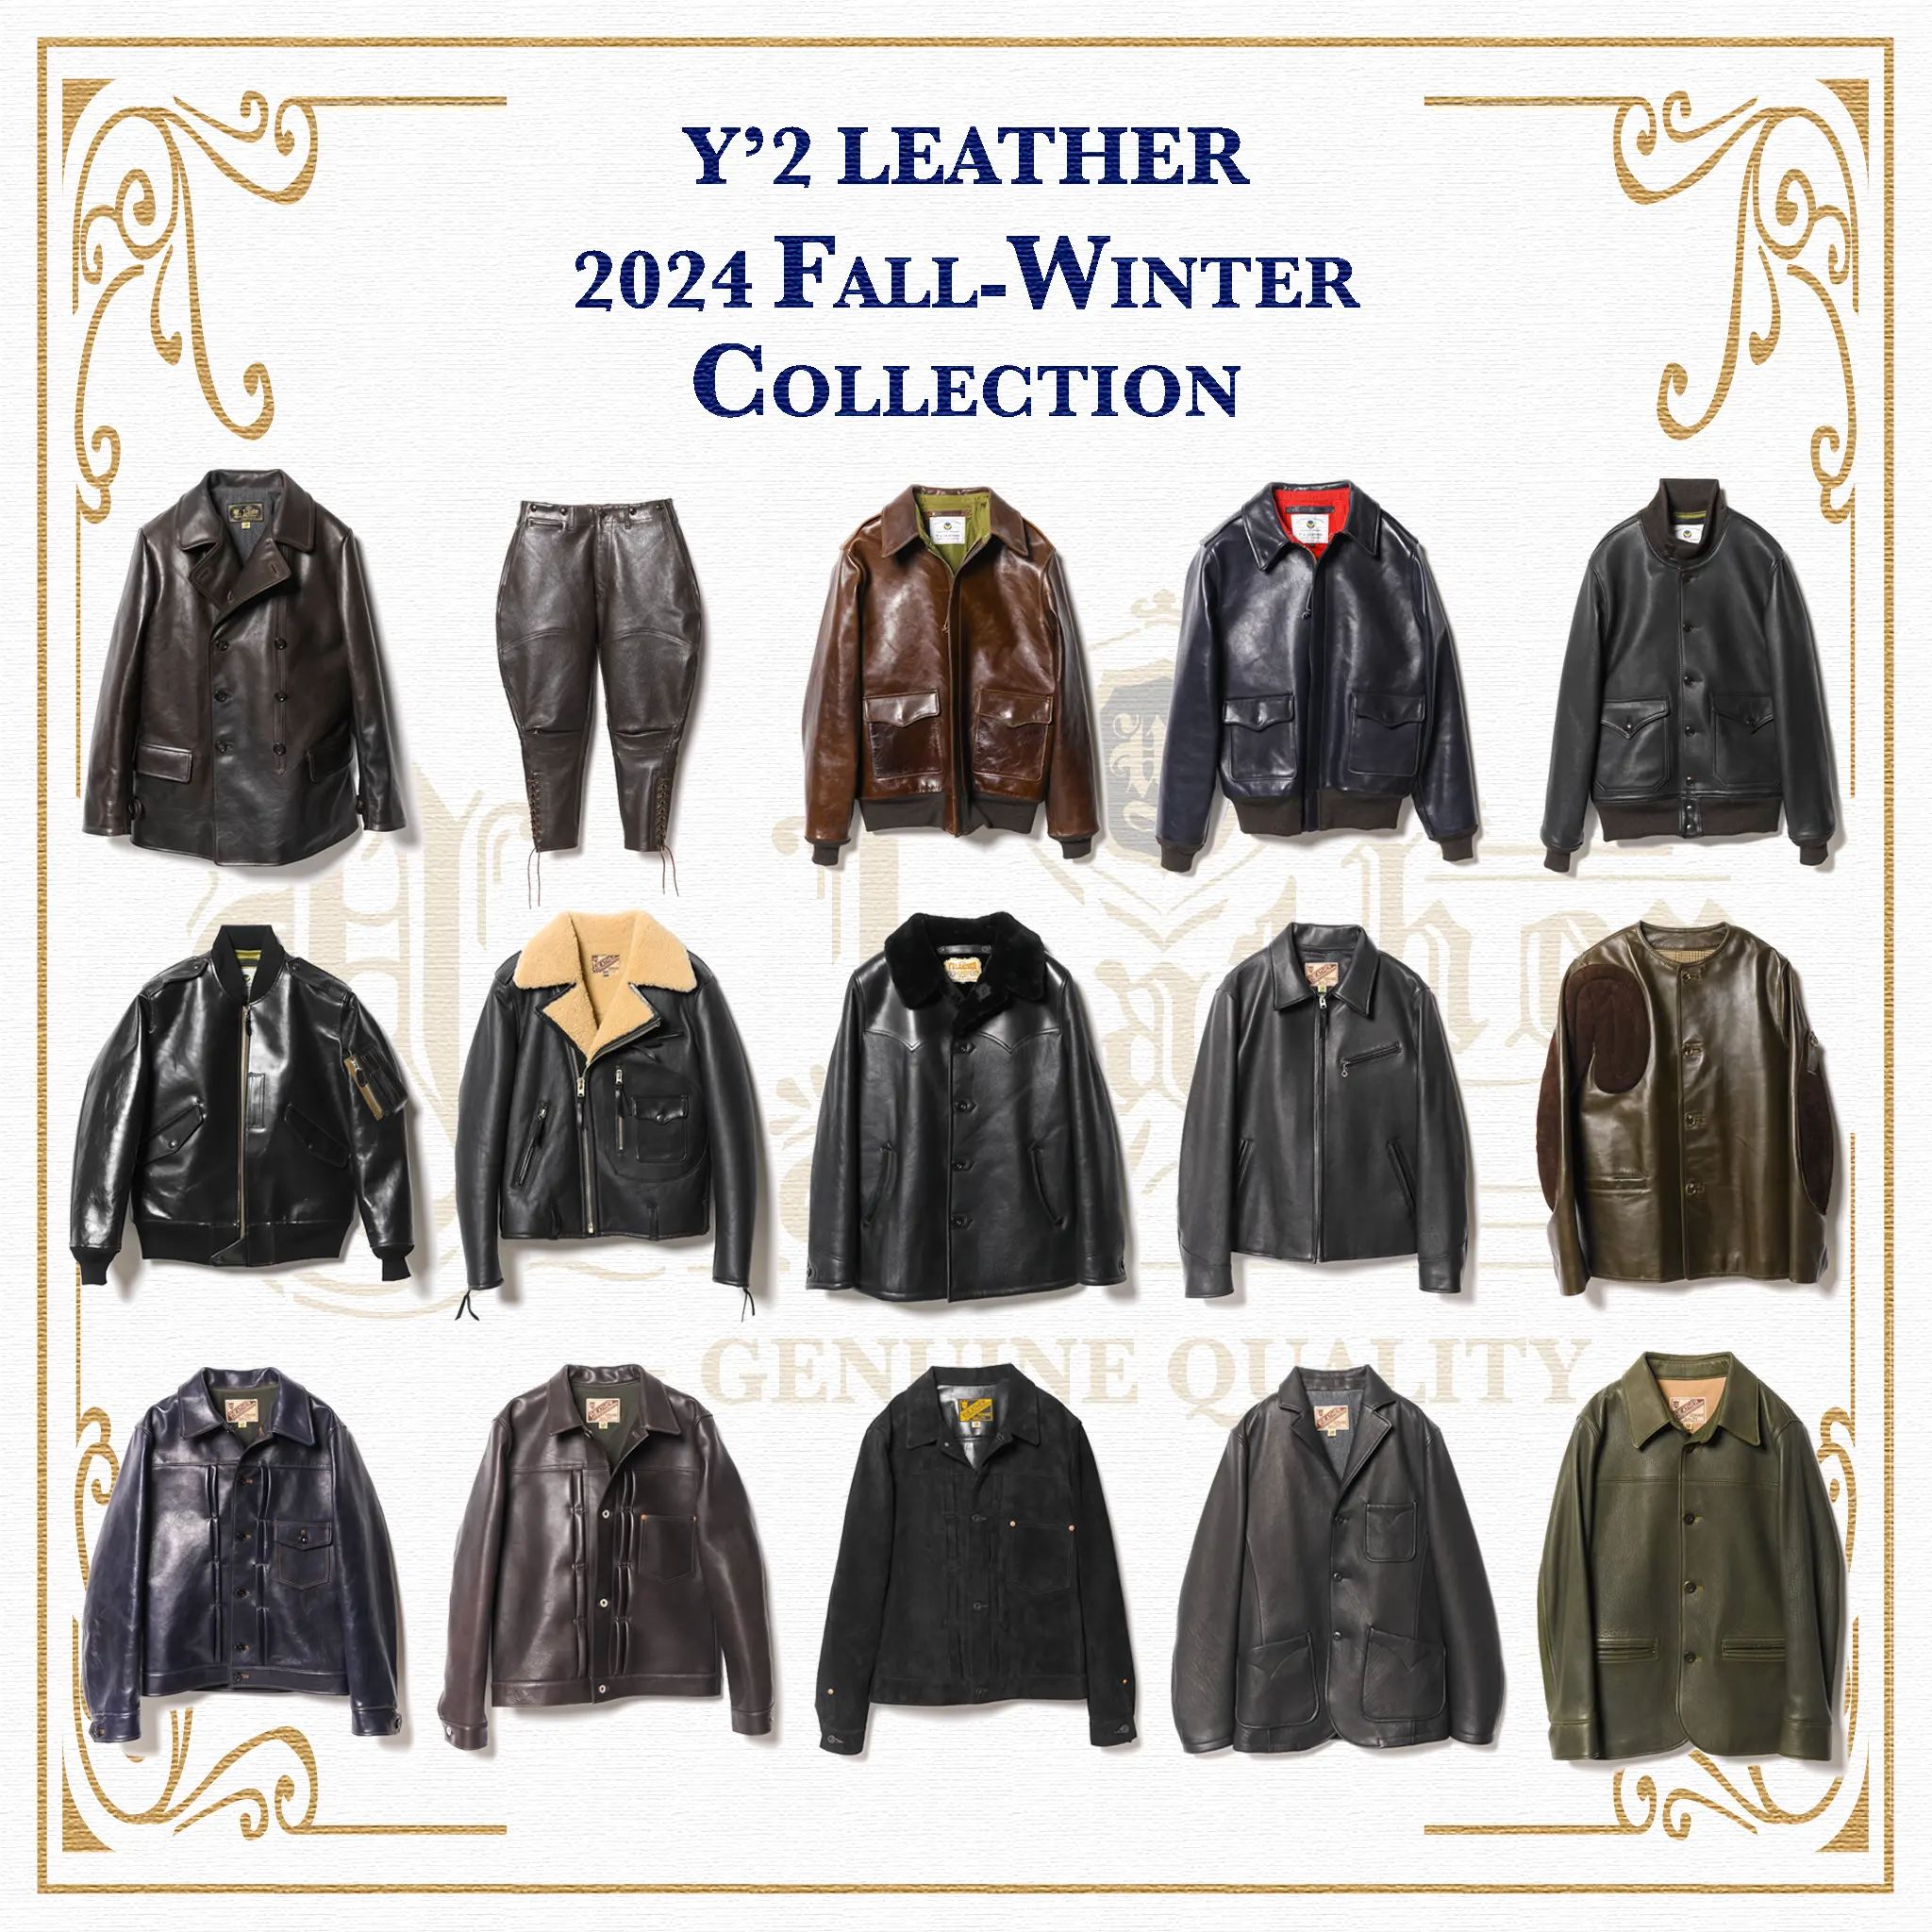 Y'2 LEATHER Fall-Winter '24 Collection... レザージャケット 革ジャン